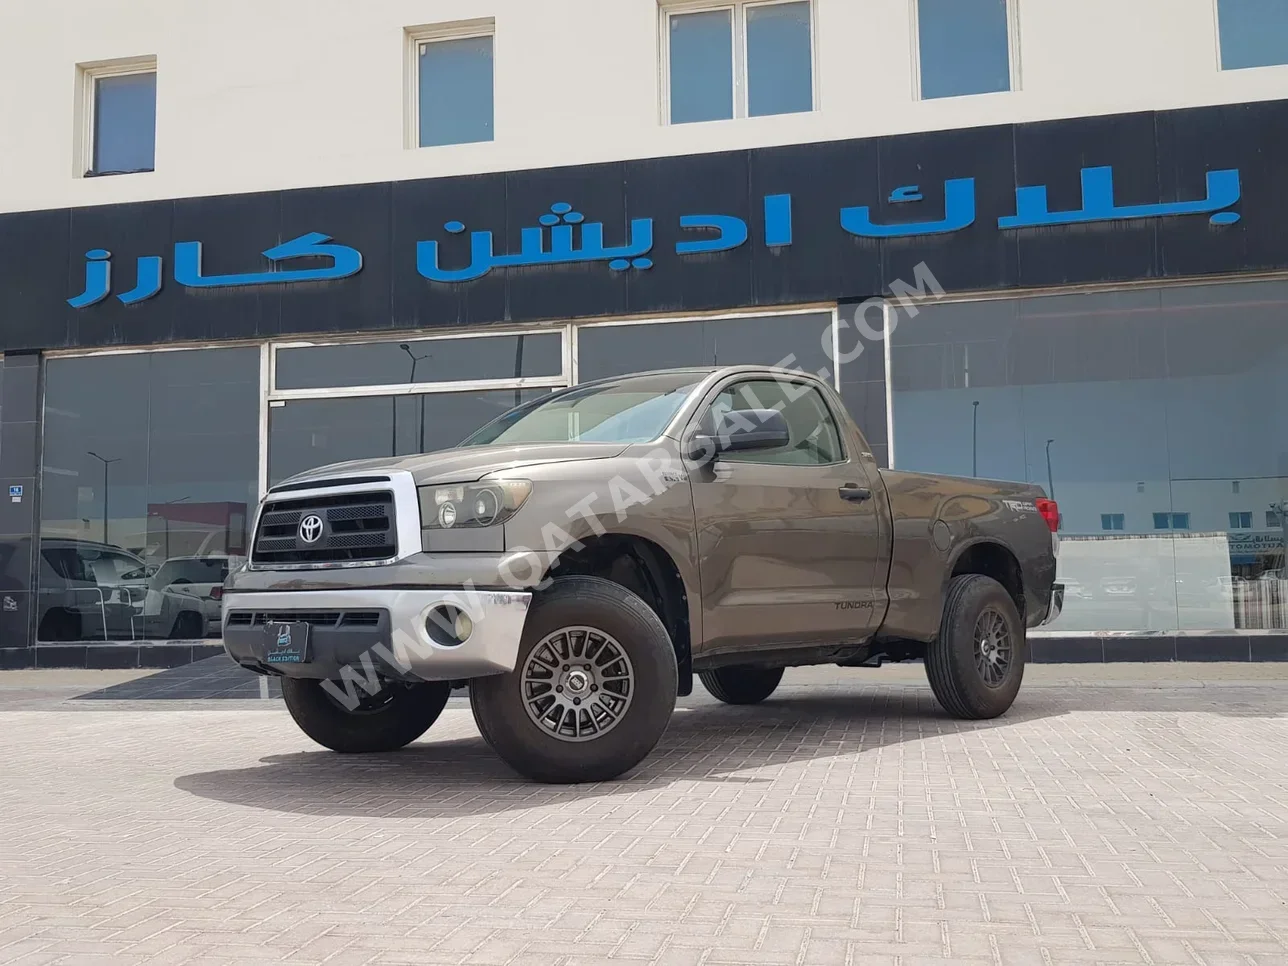 Toyota  Tundra  2010  Automatic  202,000 Km  8 Cylinder  Four Wheel Drive (4WD)  Pick Up  Brown